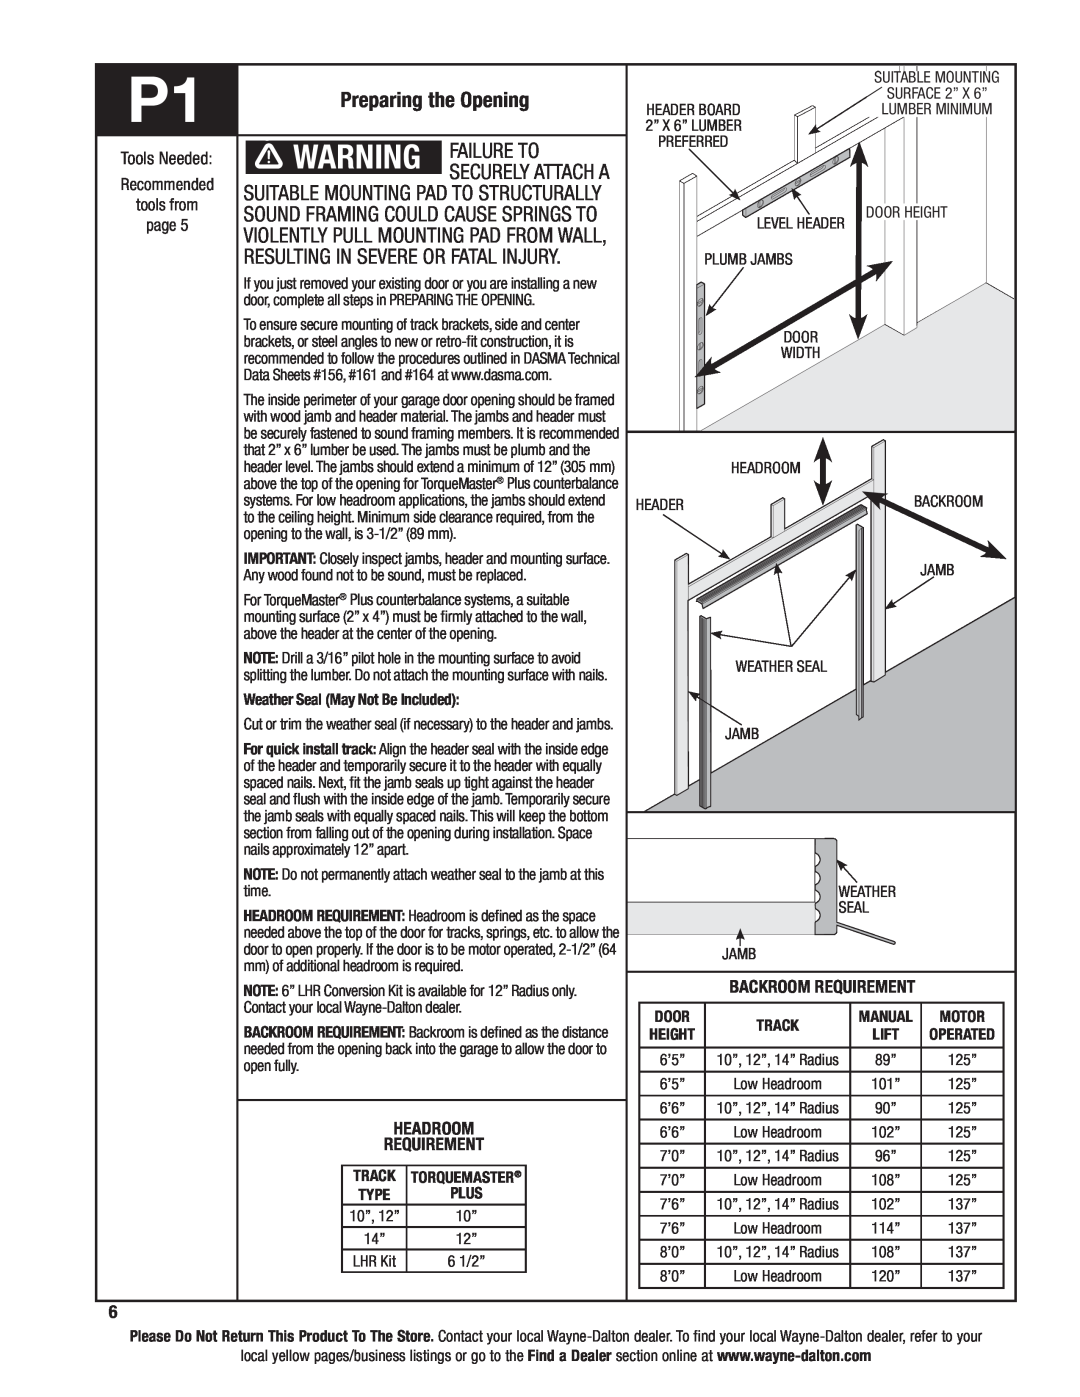 Wayne-Dalton 9400, 9100, 9600 installation instructions securely attach a, Failure to, suitable mounting pad to structurally 